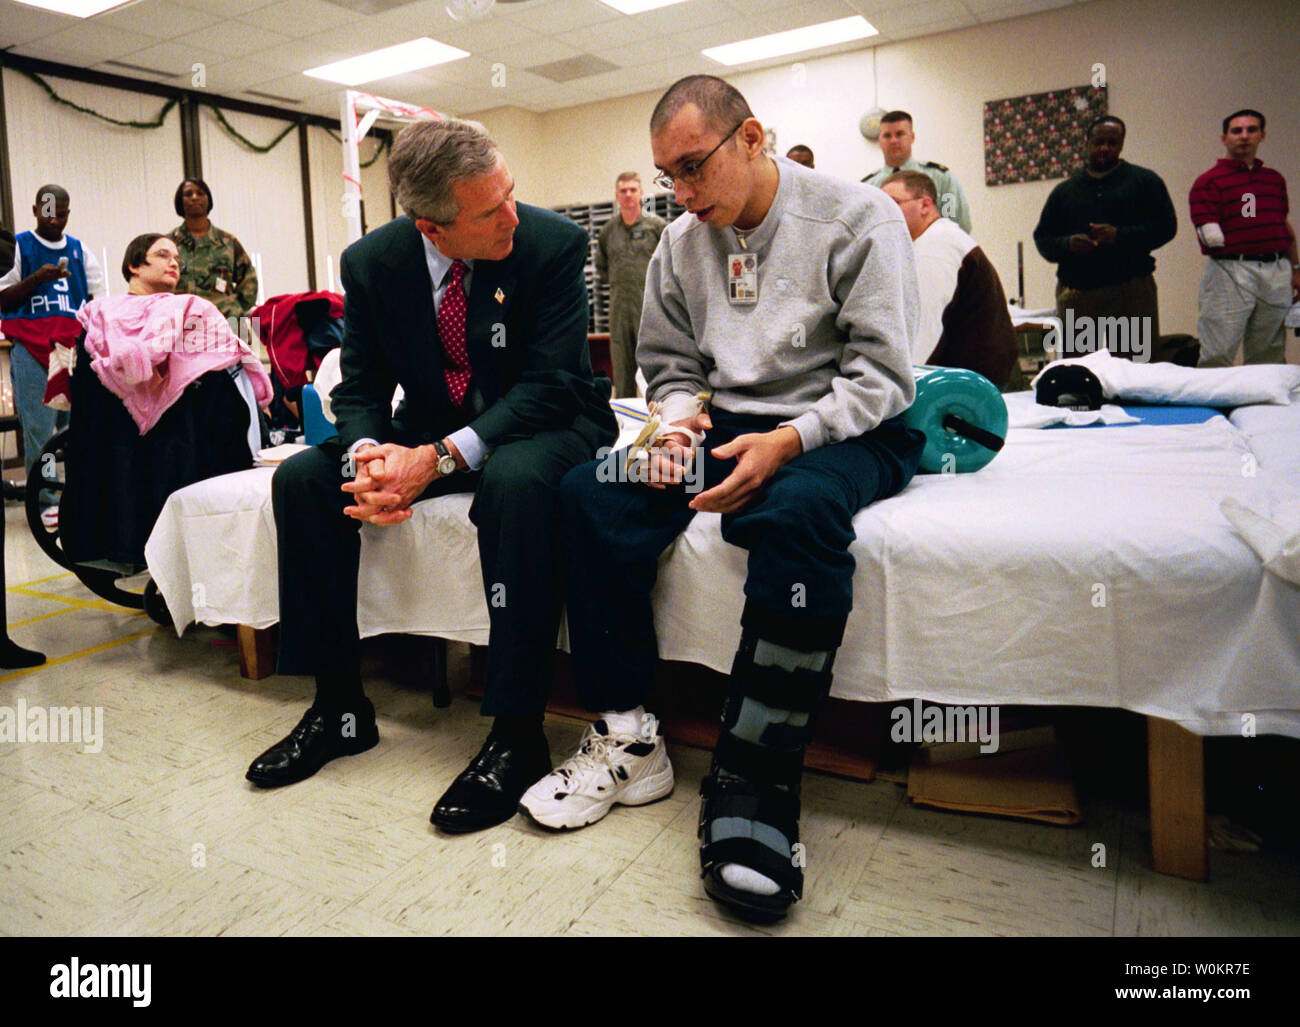 Visiting troops at Walter Reed Army Medical Center in Washington, D.C., President George W. Bush talks with U.S. Army Specialist Adolfo Lopez-Santini of San Diego, Calif., Thursday, Dec. 18, 2003. Spc. Lopez-Santini was injured while serving in Iraq. (UPI Photo/Eric Draper/White House) Stock Photo